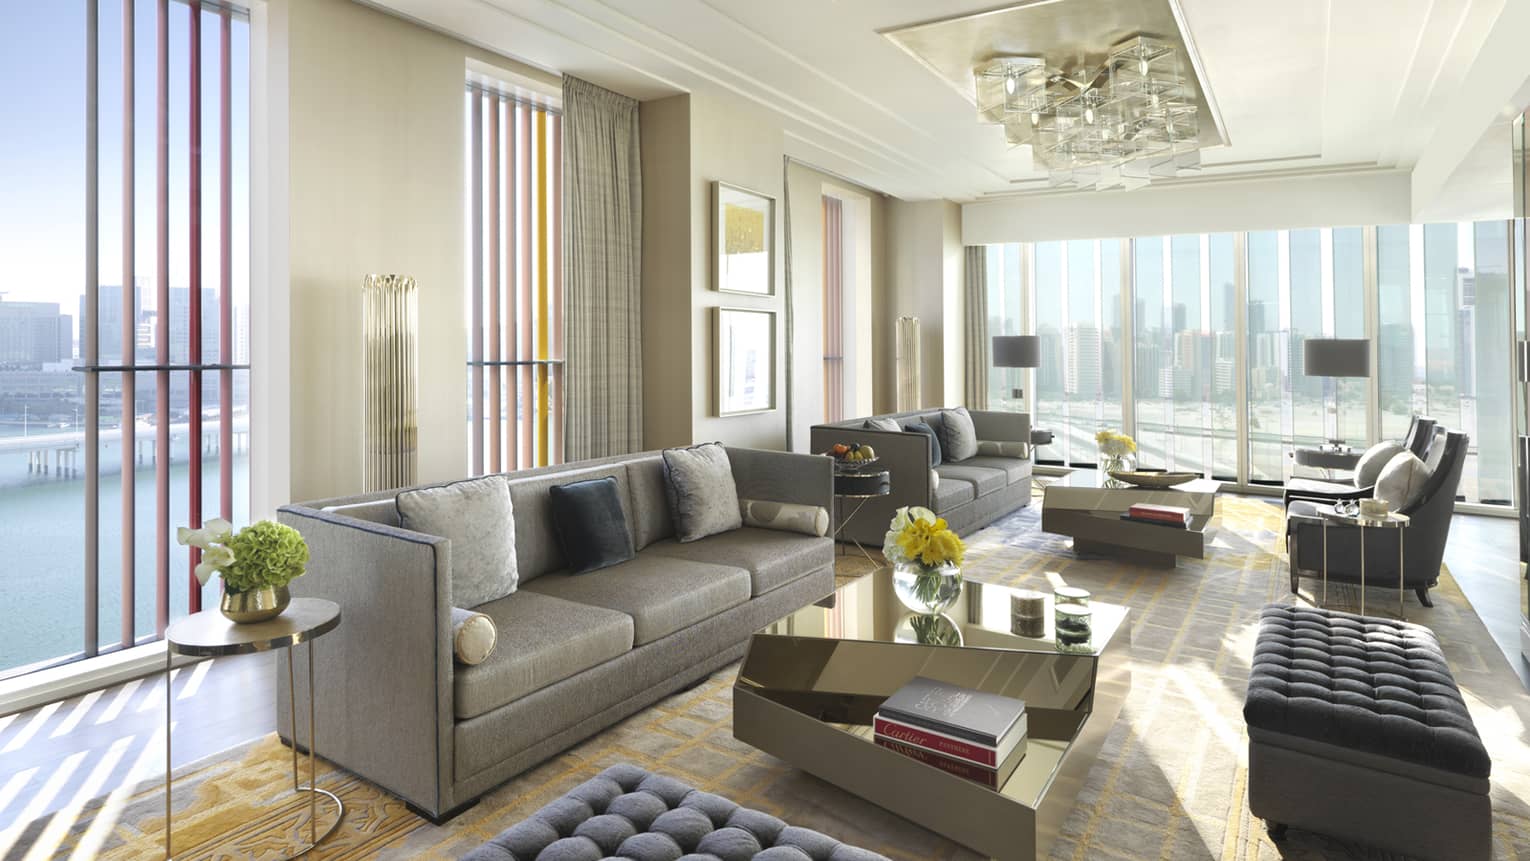 Presidential Suite with grey sofas and ottomans, floor-to-ceiling corner windows with sunny Gulf views